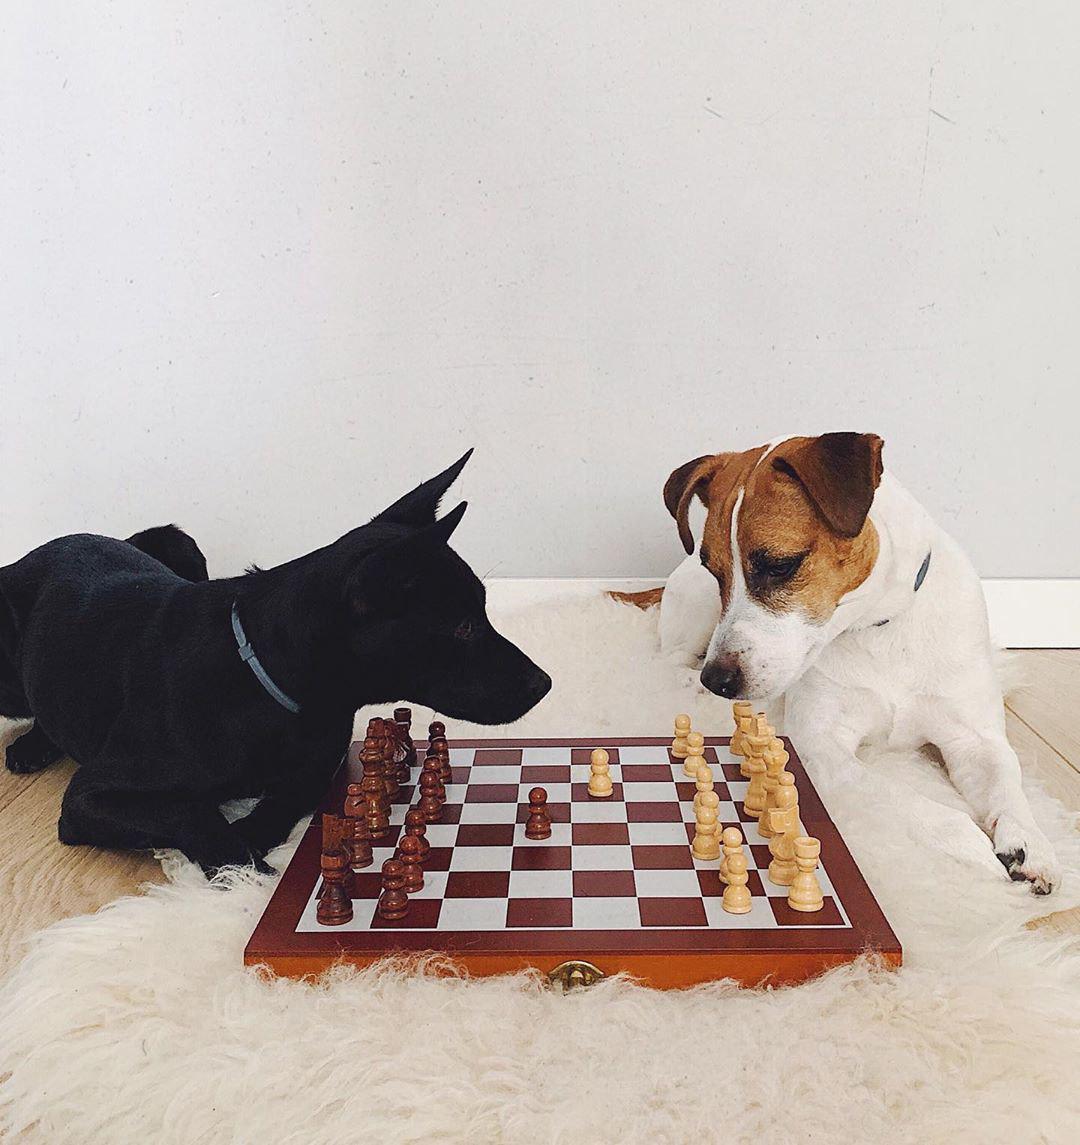 Jack Russell playing chess on the floor with a plain black dog